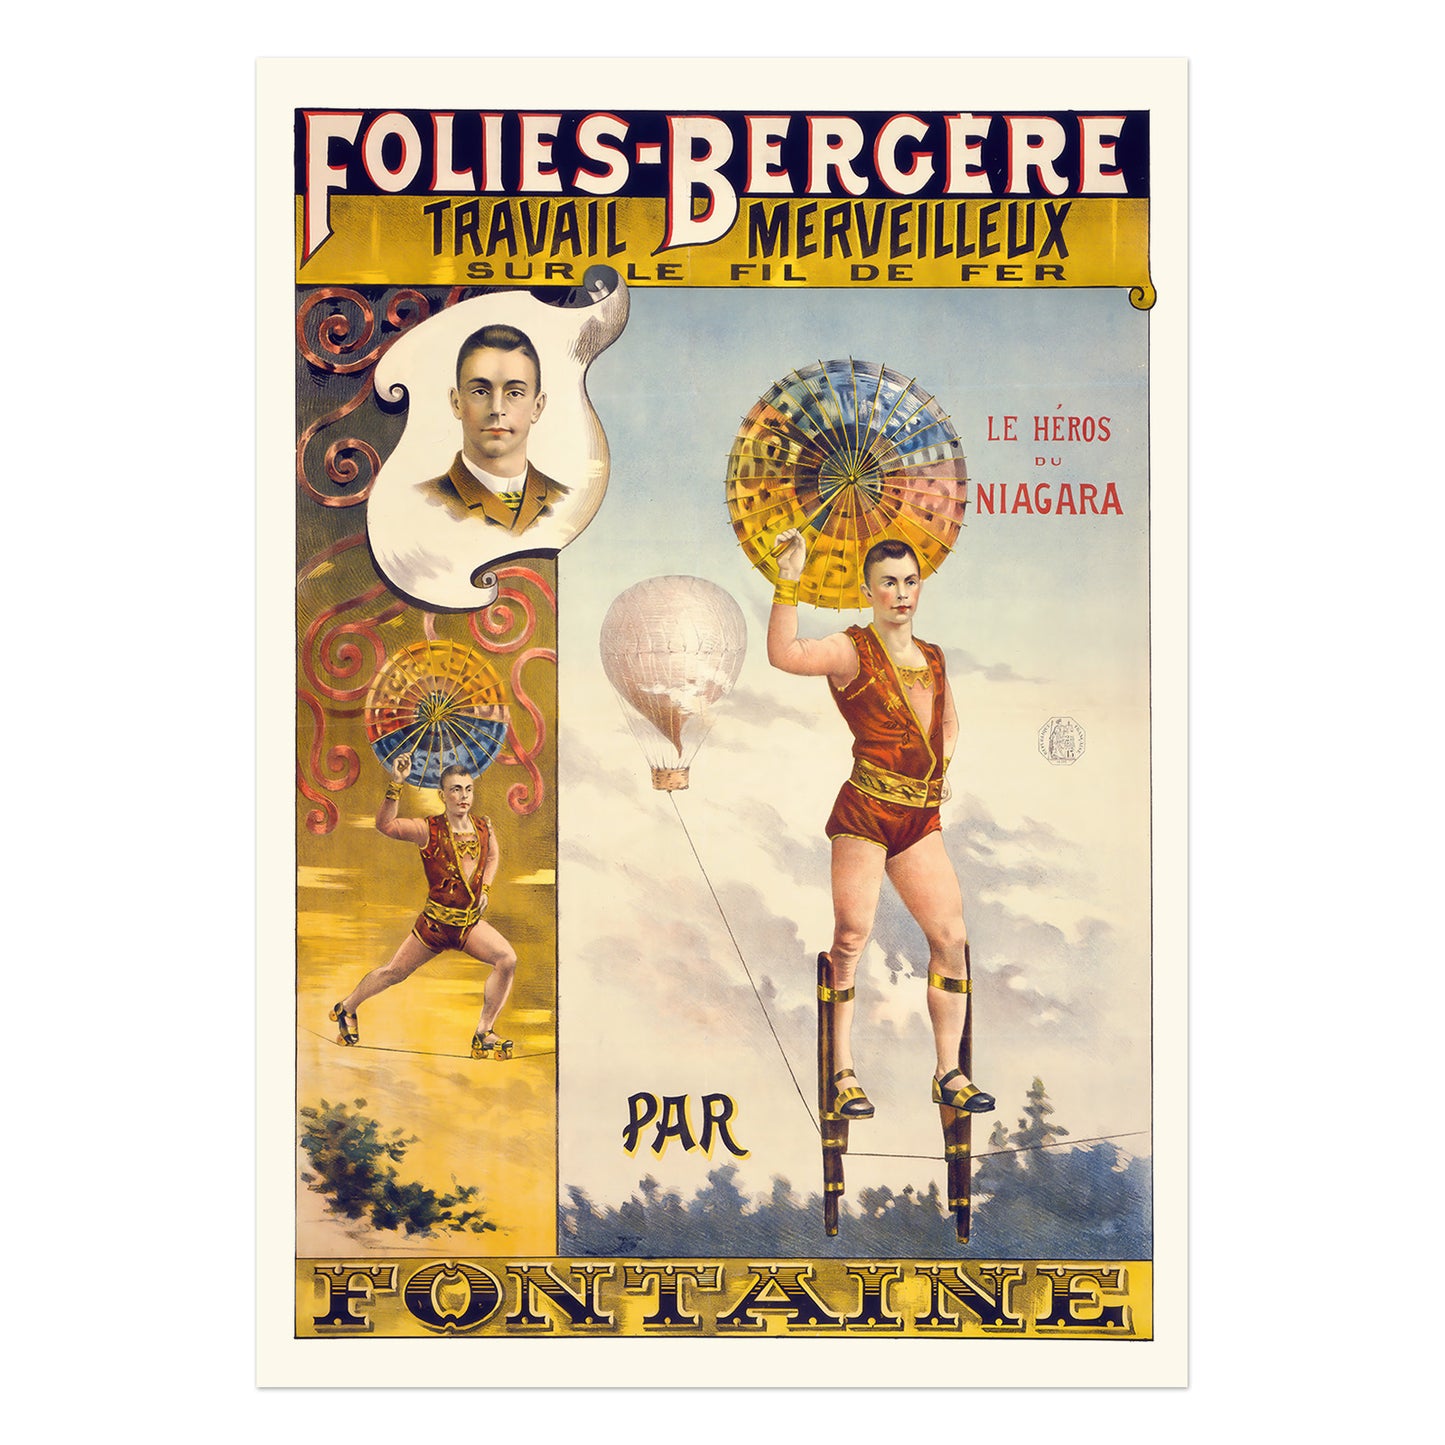 The line dancer Fontaine from the Folies-Bergère